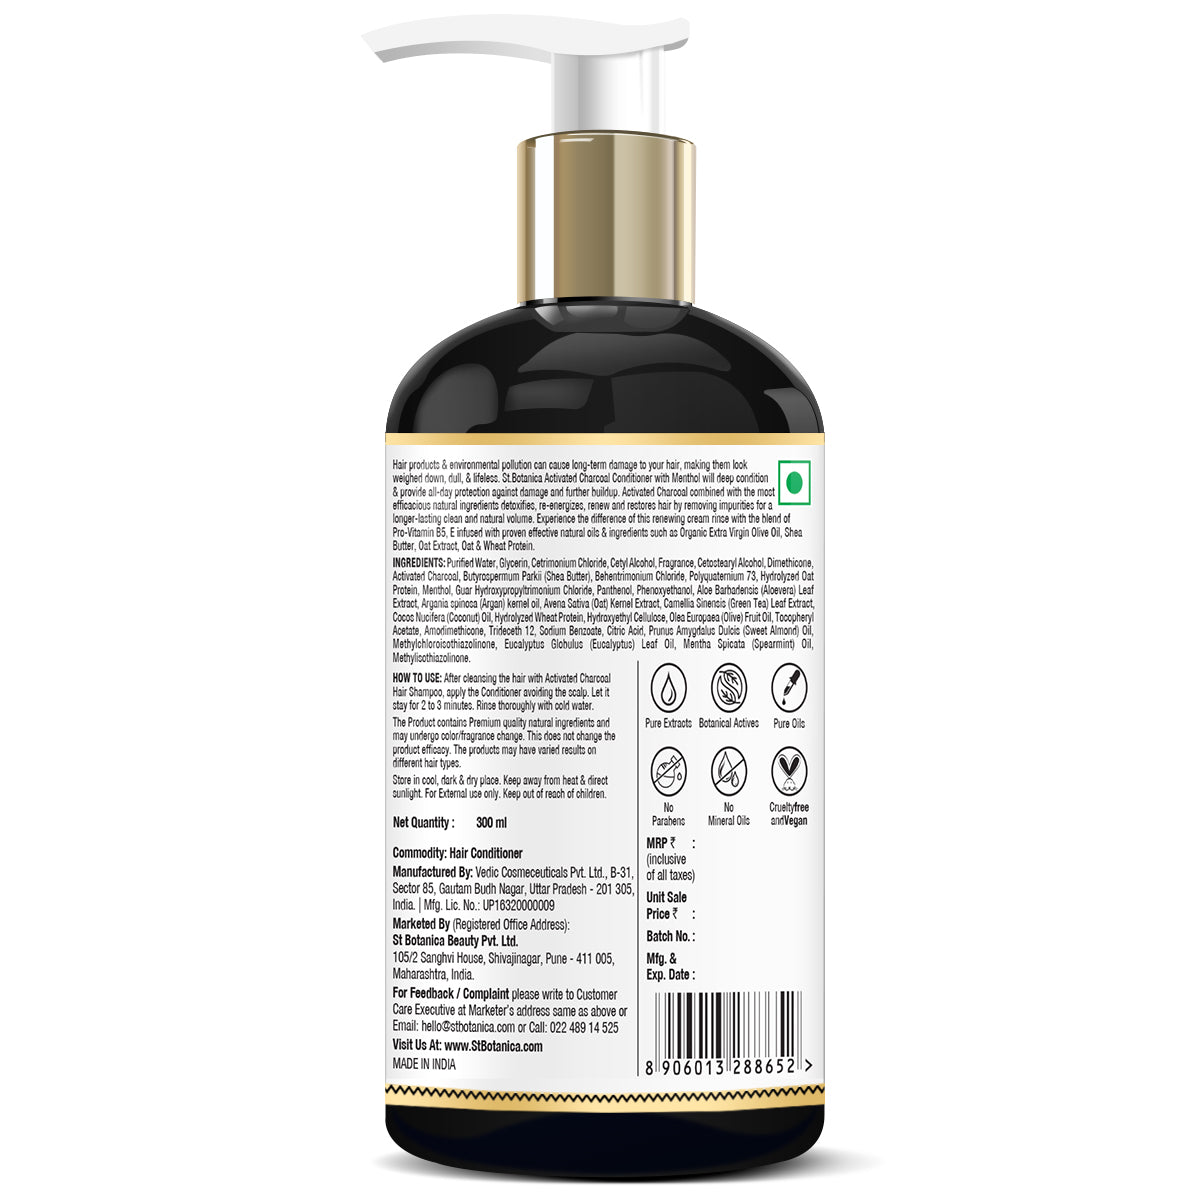 St.Botanica Activated Charcoal Hair Conditioner, Deeply Purifies and Removes Impurities, Refreshing Menthol With Organic Olive Oil, Shea Butter, Oats & Wheat Protein, 300 ml